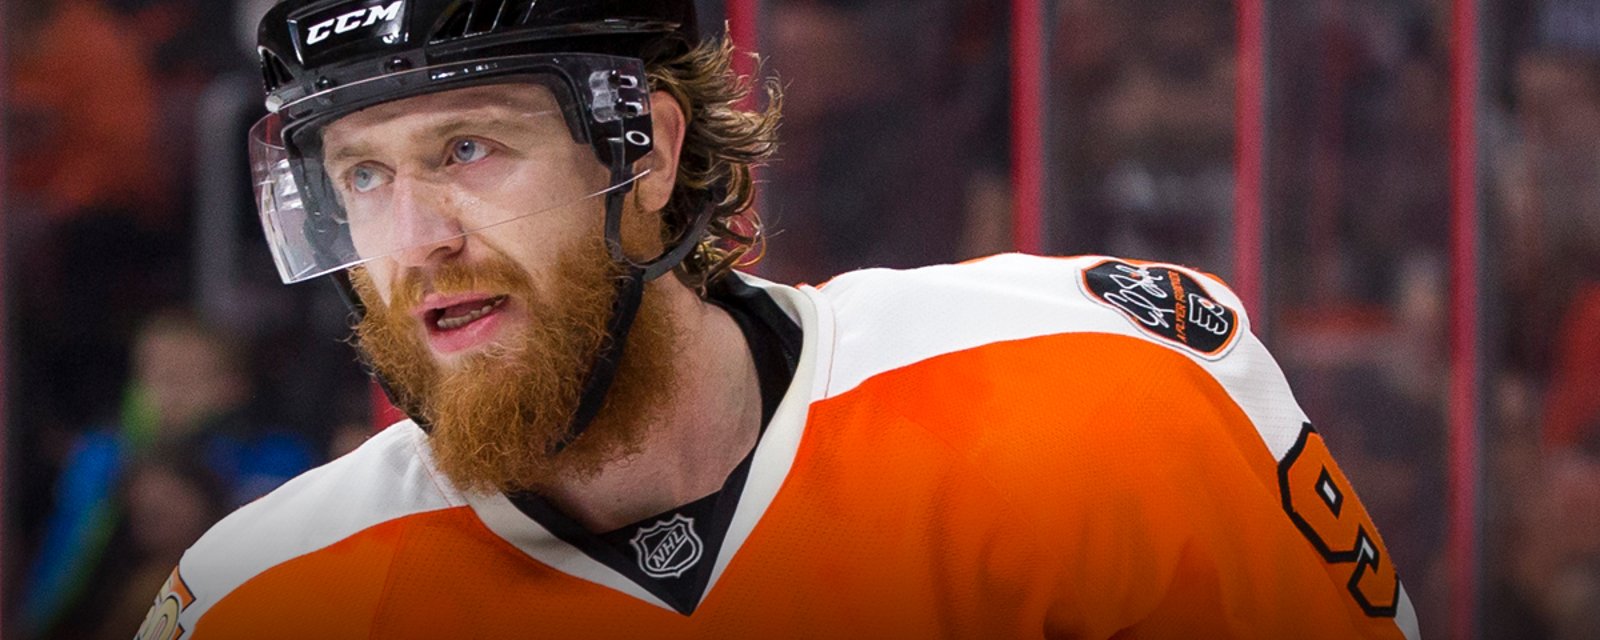 Goal of the night: Voracek sets up absolutely ridiculous goal